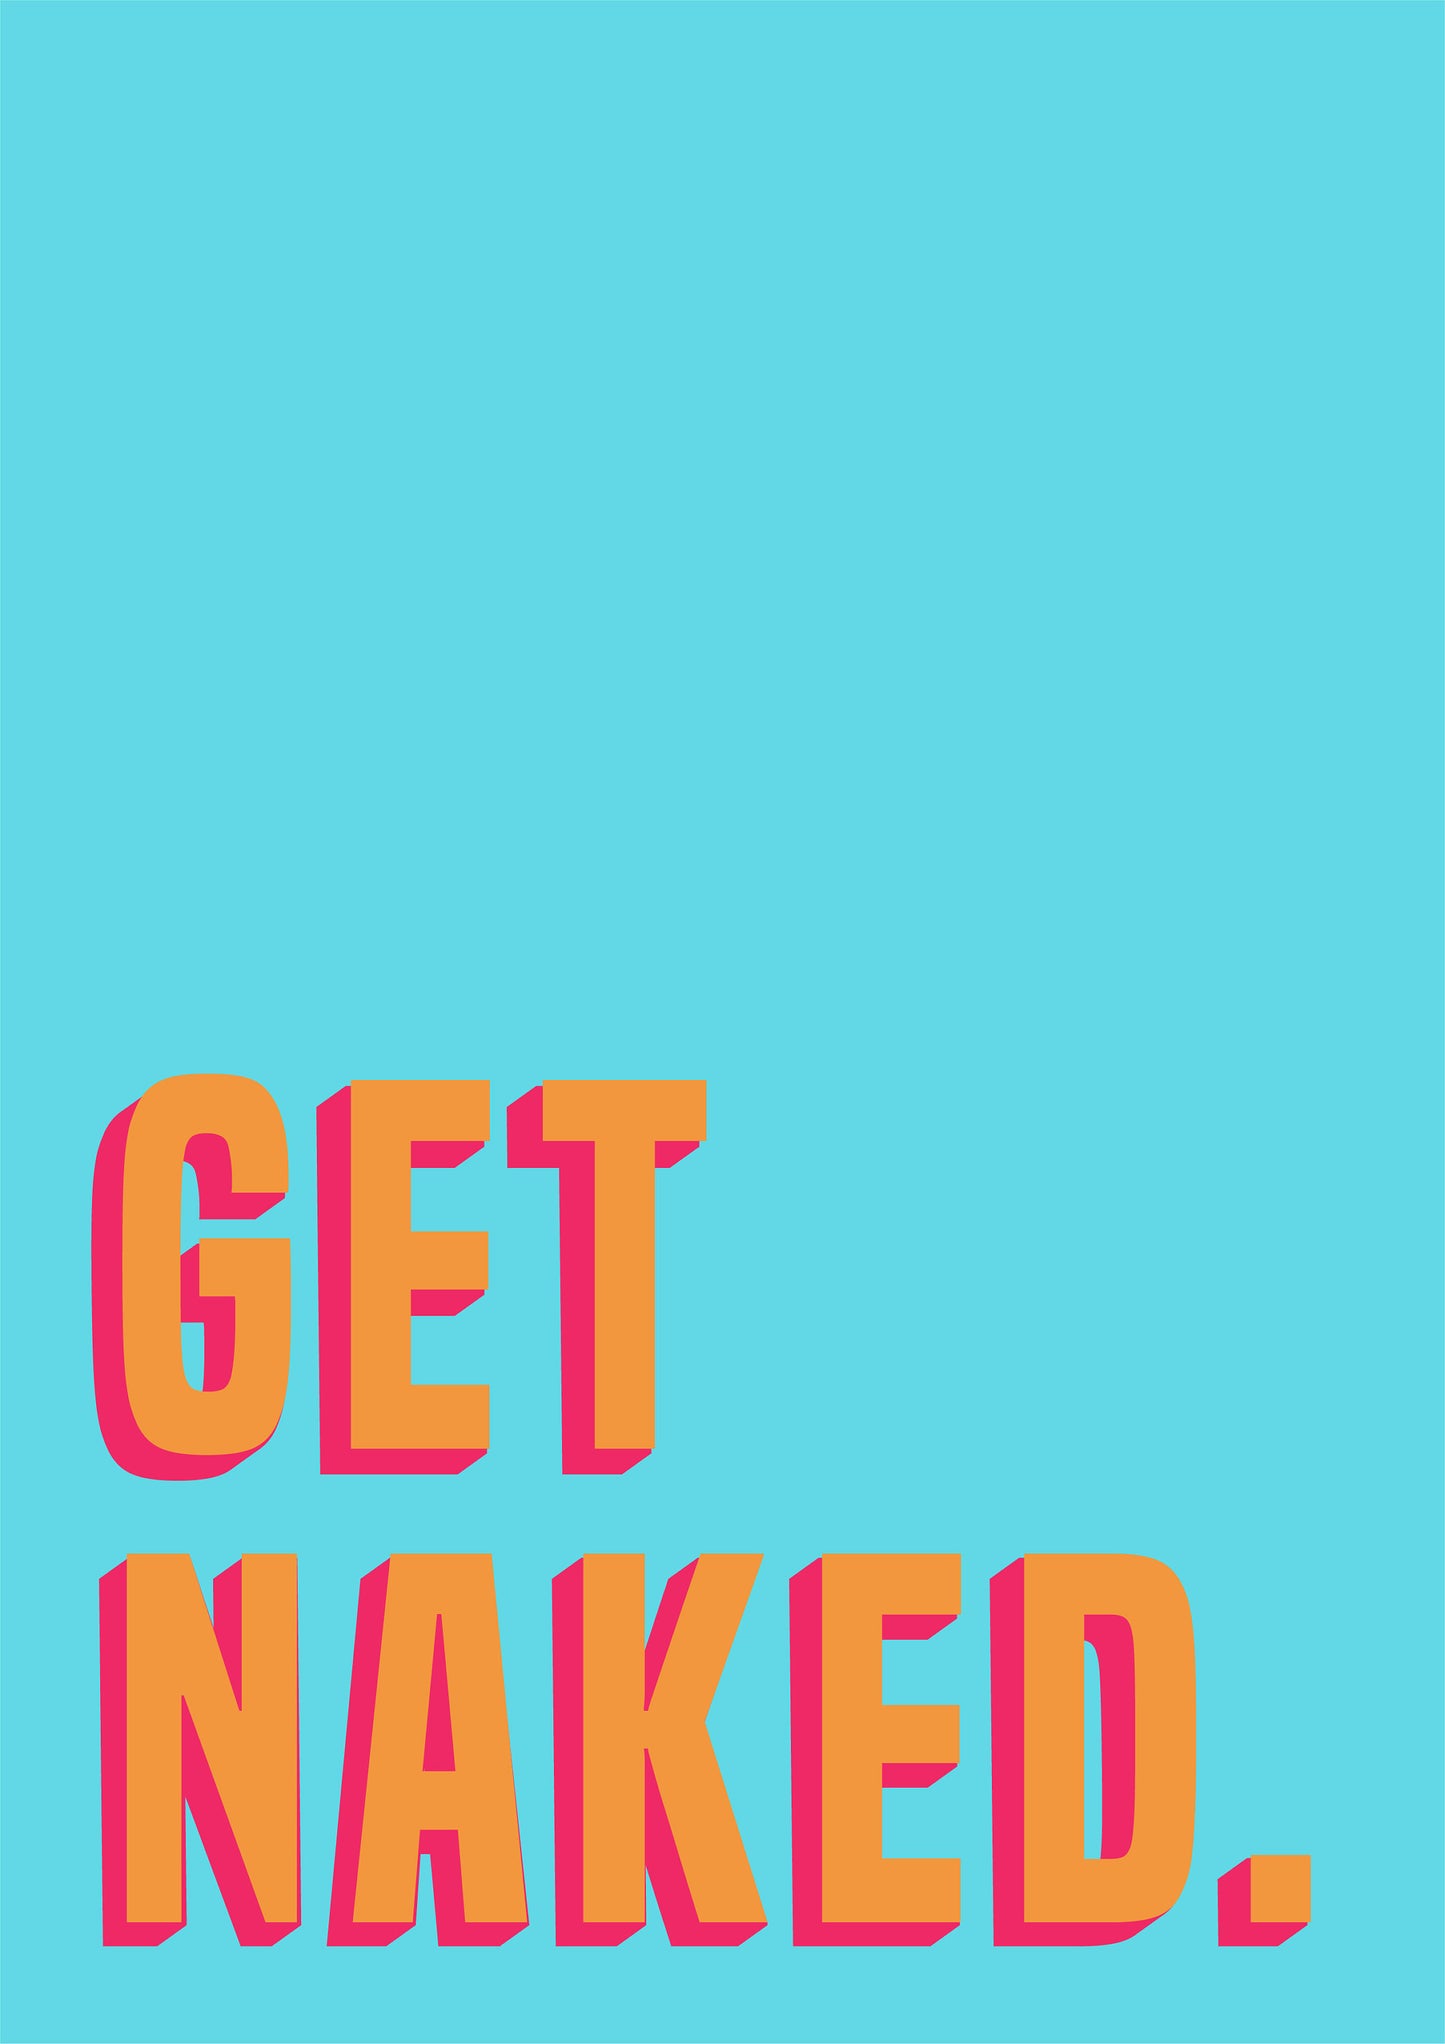 Get Naked Cheeky Funny Quote Bathroom Print